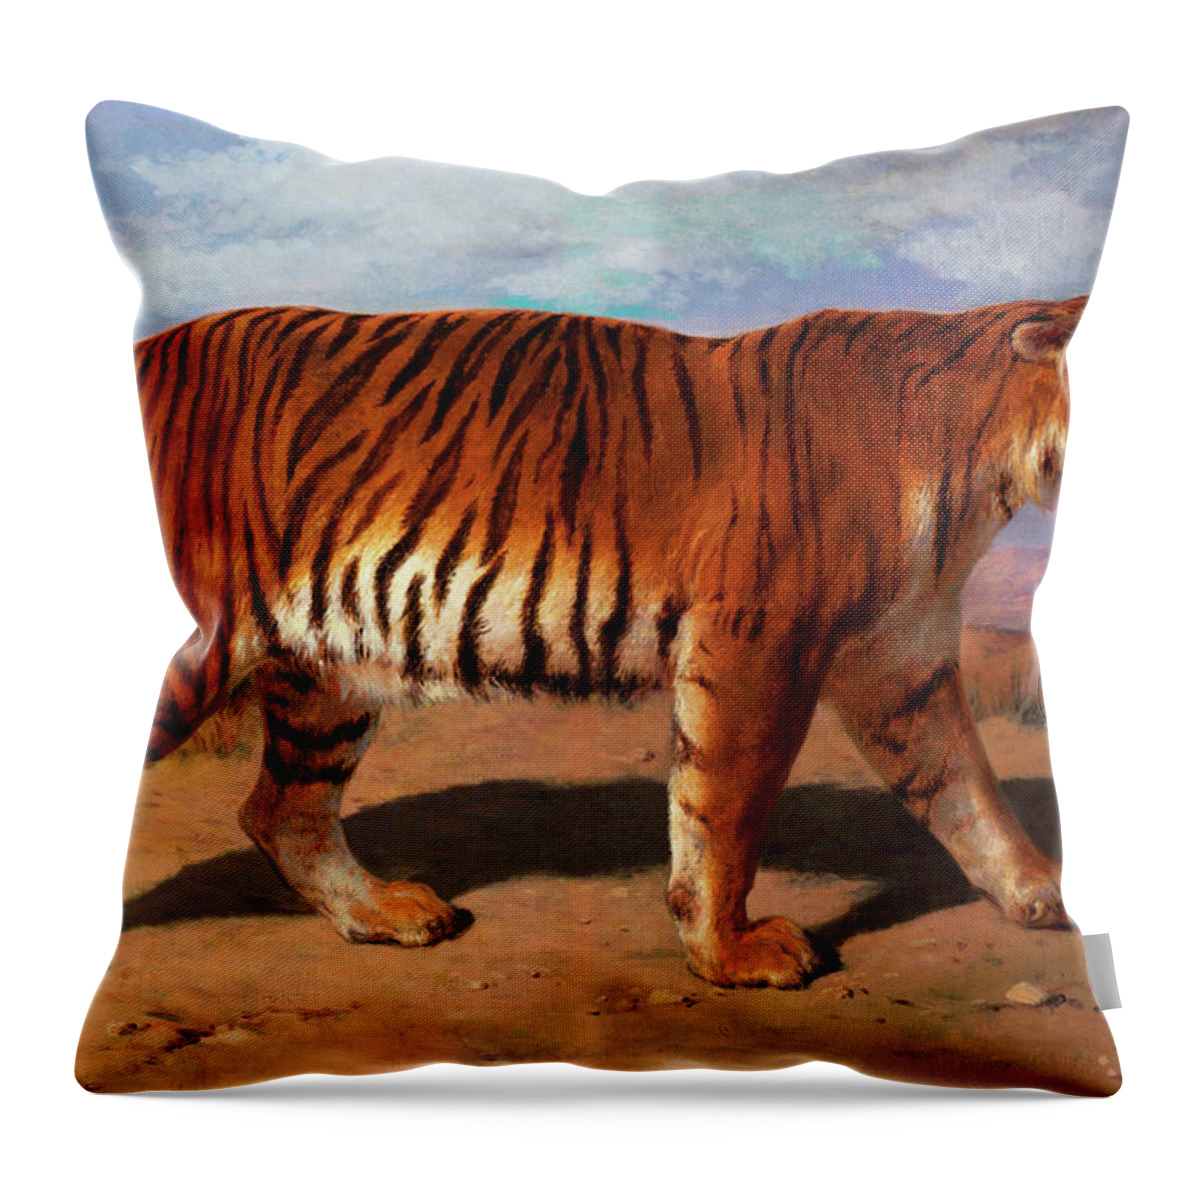 Stalking Tiger Throw Pillow featuring the painting Stalking Tiger #1 by Rosa Bonheur